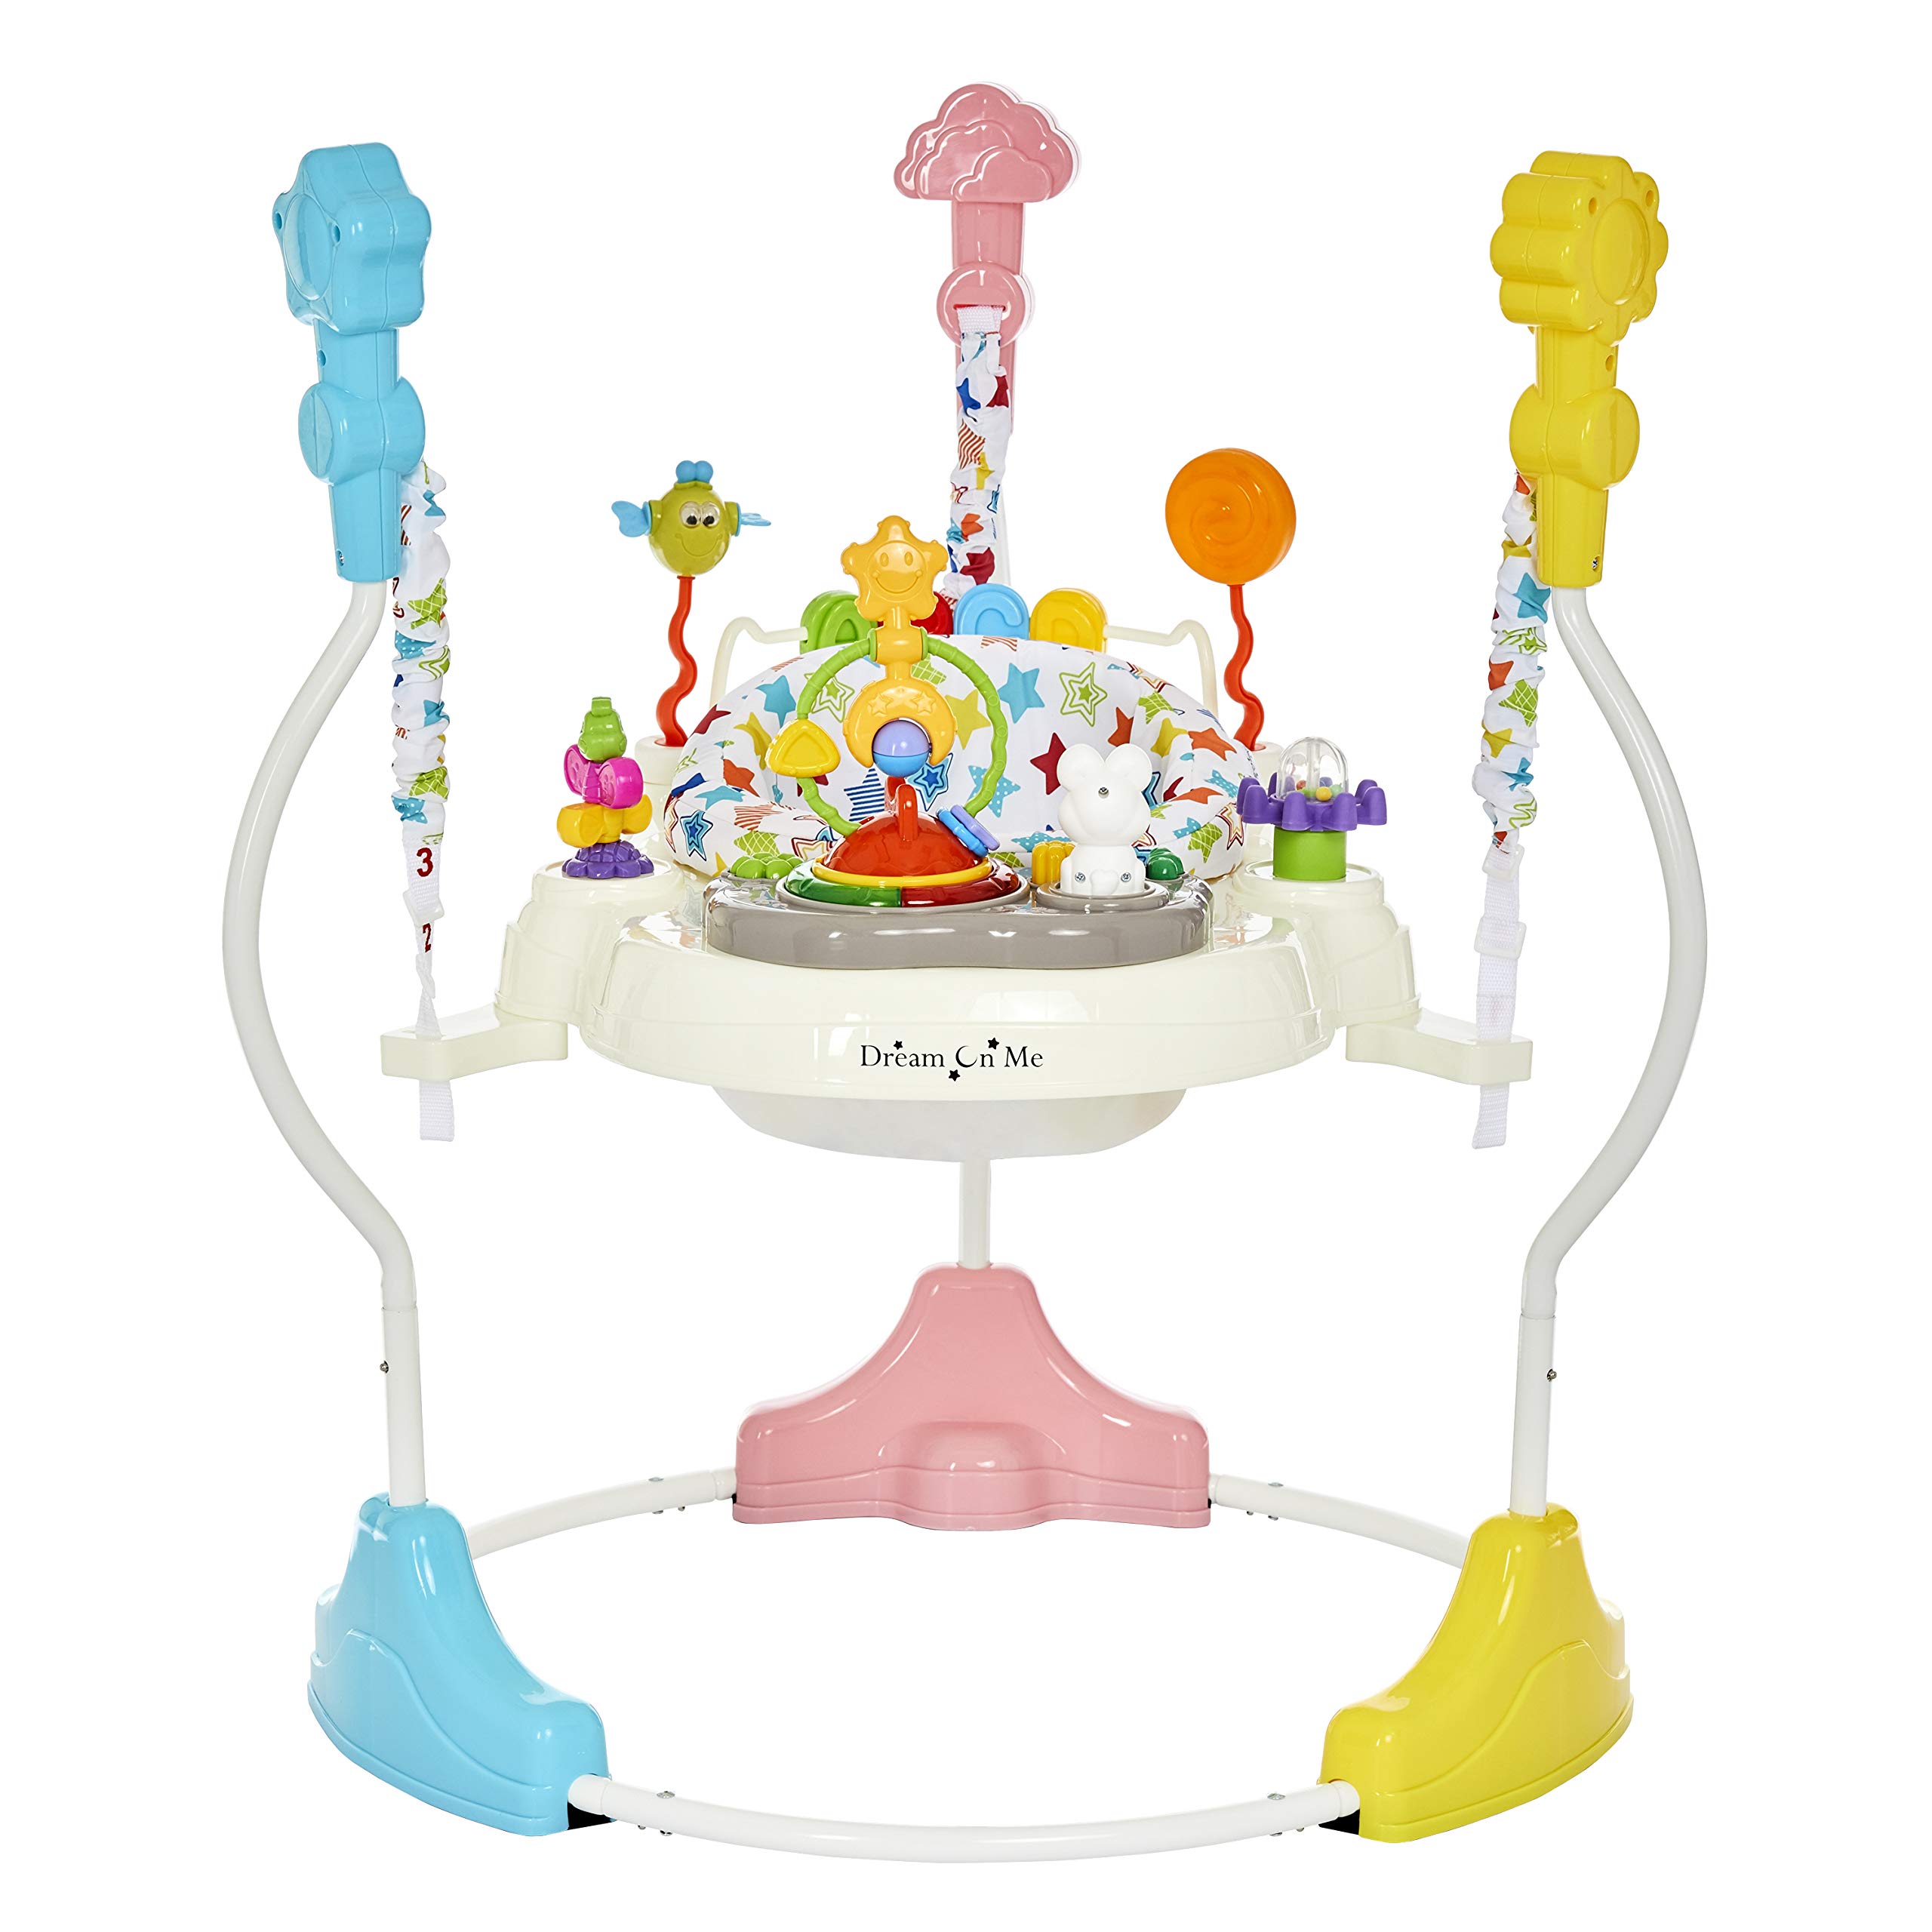 Dream On Me Zany 2-in-1 Baby Activity Center and Bouncer in Star Print, Sturdy and Strong Frame, 3 Height Positions, 360° Rotating Seat, 12 Songs with Flash Lights